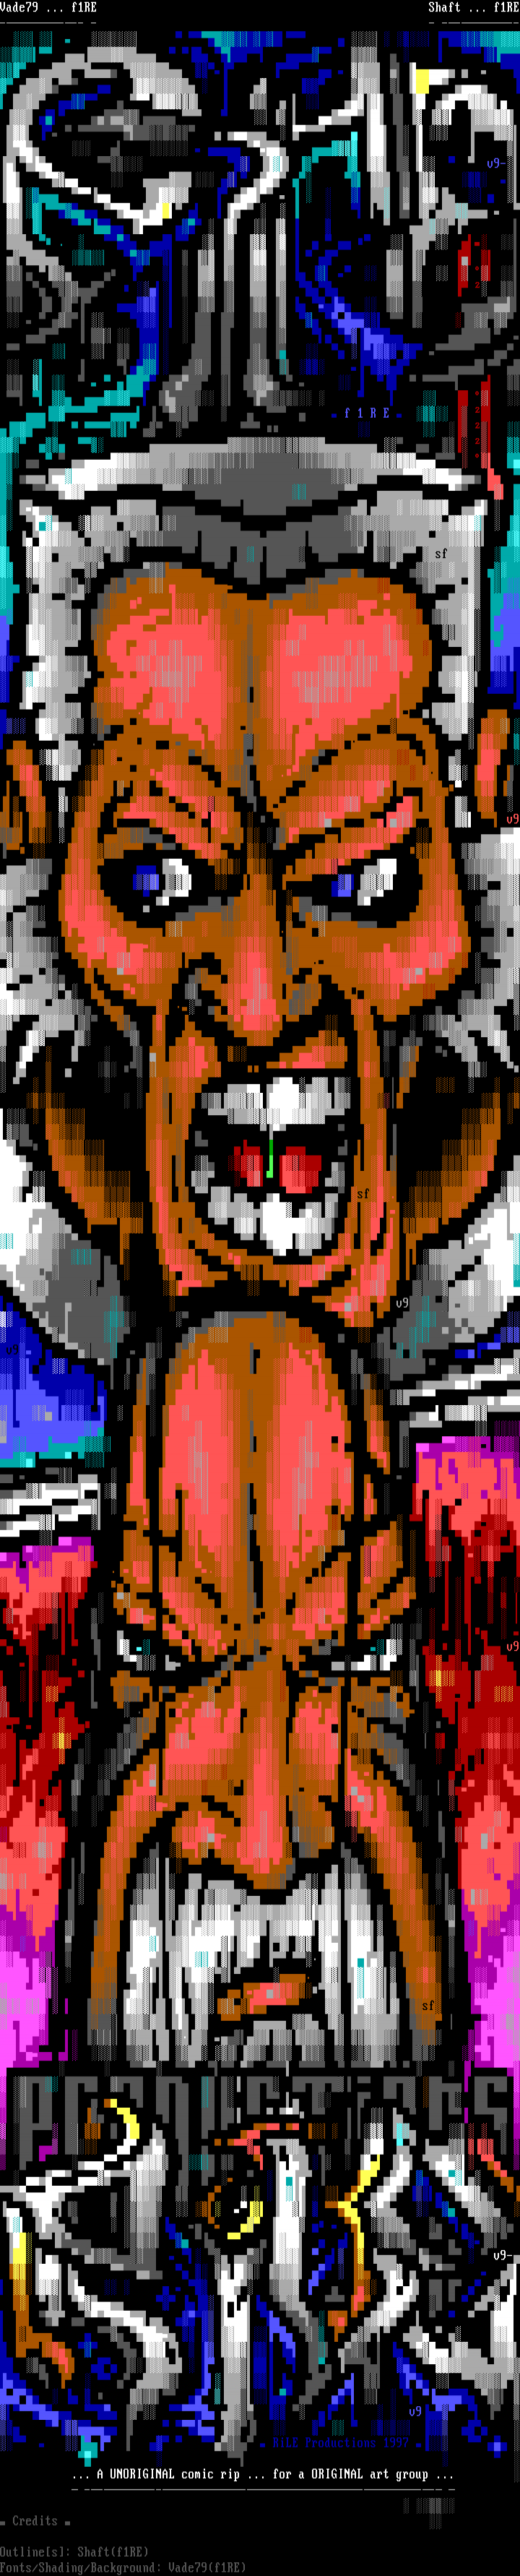 Fire Ansi, nother cheeze promo by Vade79